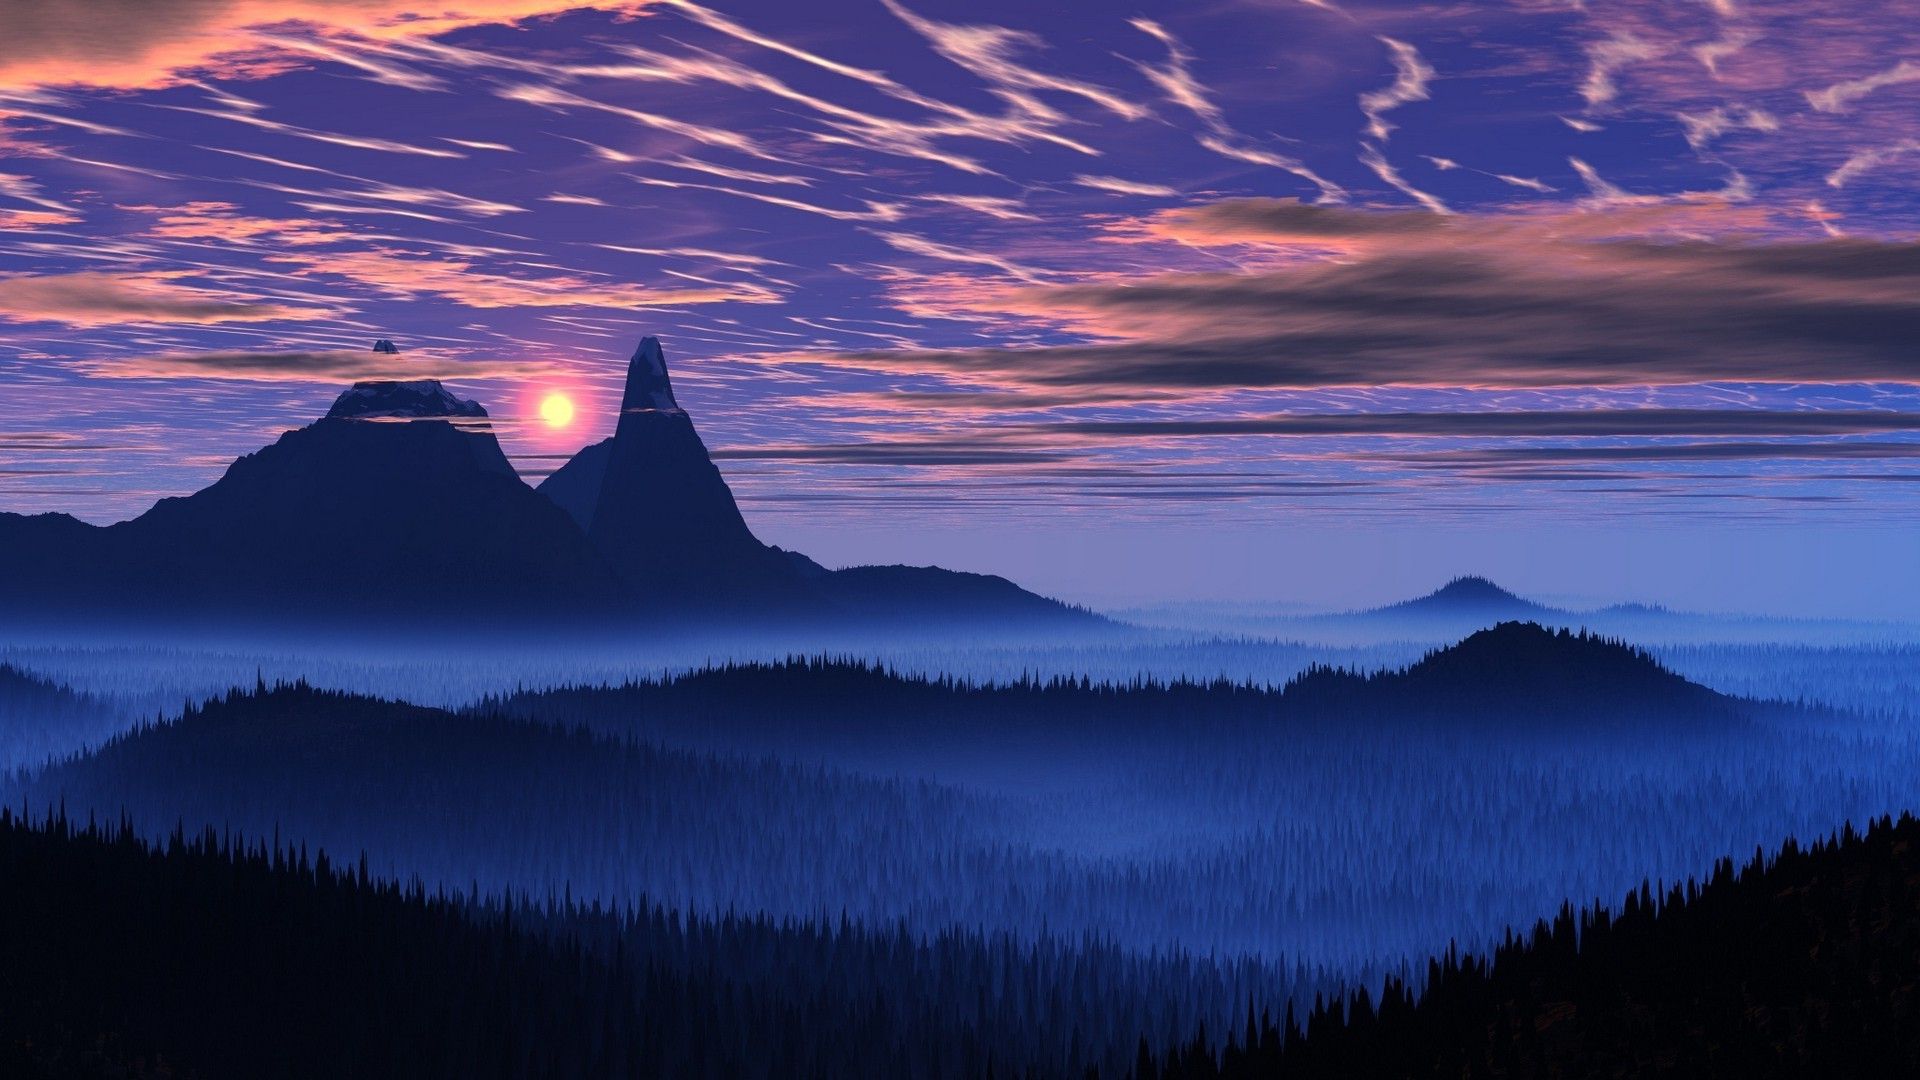 A mountain range with trees and clouds - Landscape